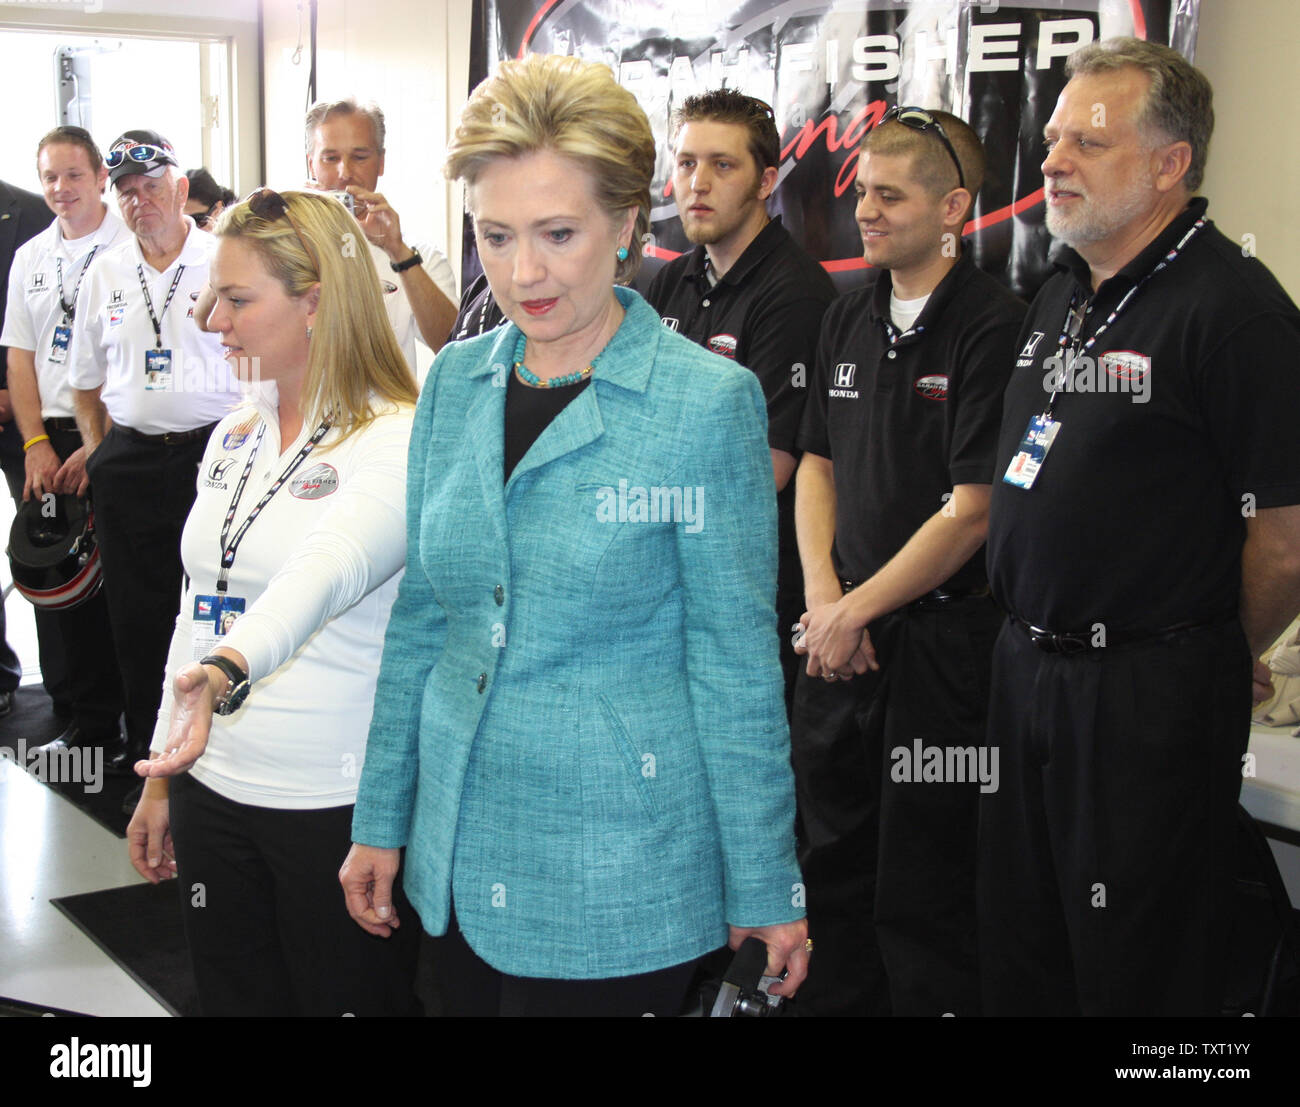 Indy 500 driver Sarah Fisher describes her car to Hillary Clinton on May 6, 2008 at the Indianapolis Motor Speedway in Indianapolis, Indiana. (UPI Photo/ Bill Coons) Stock Photo